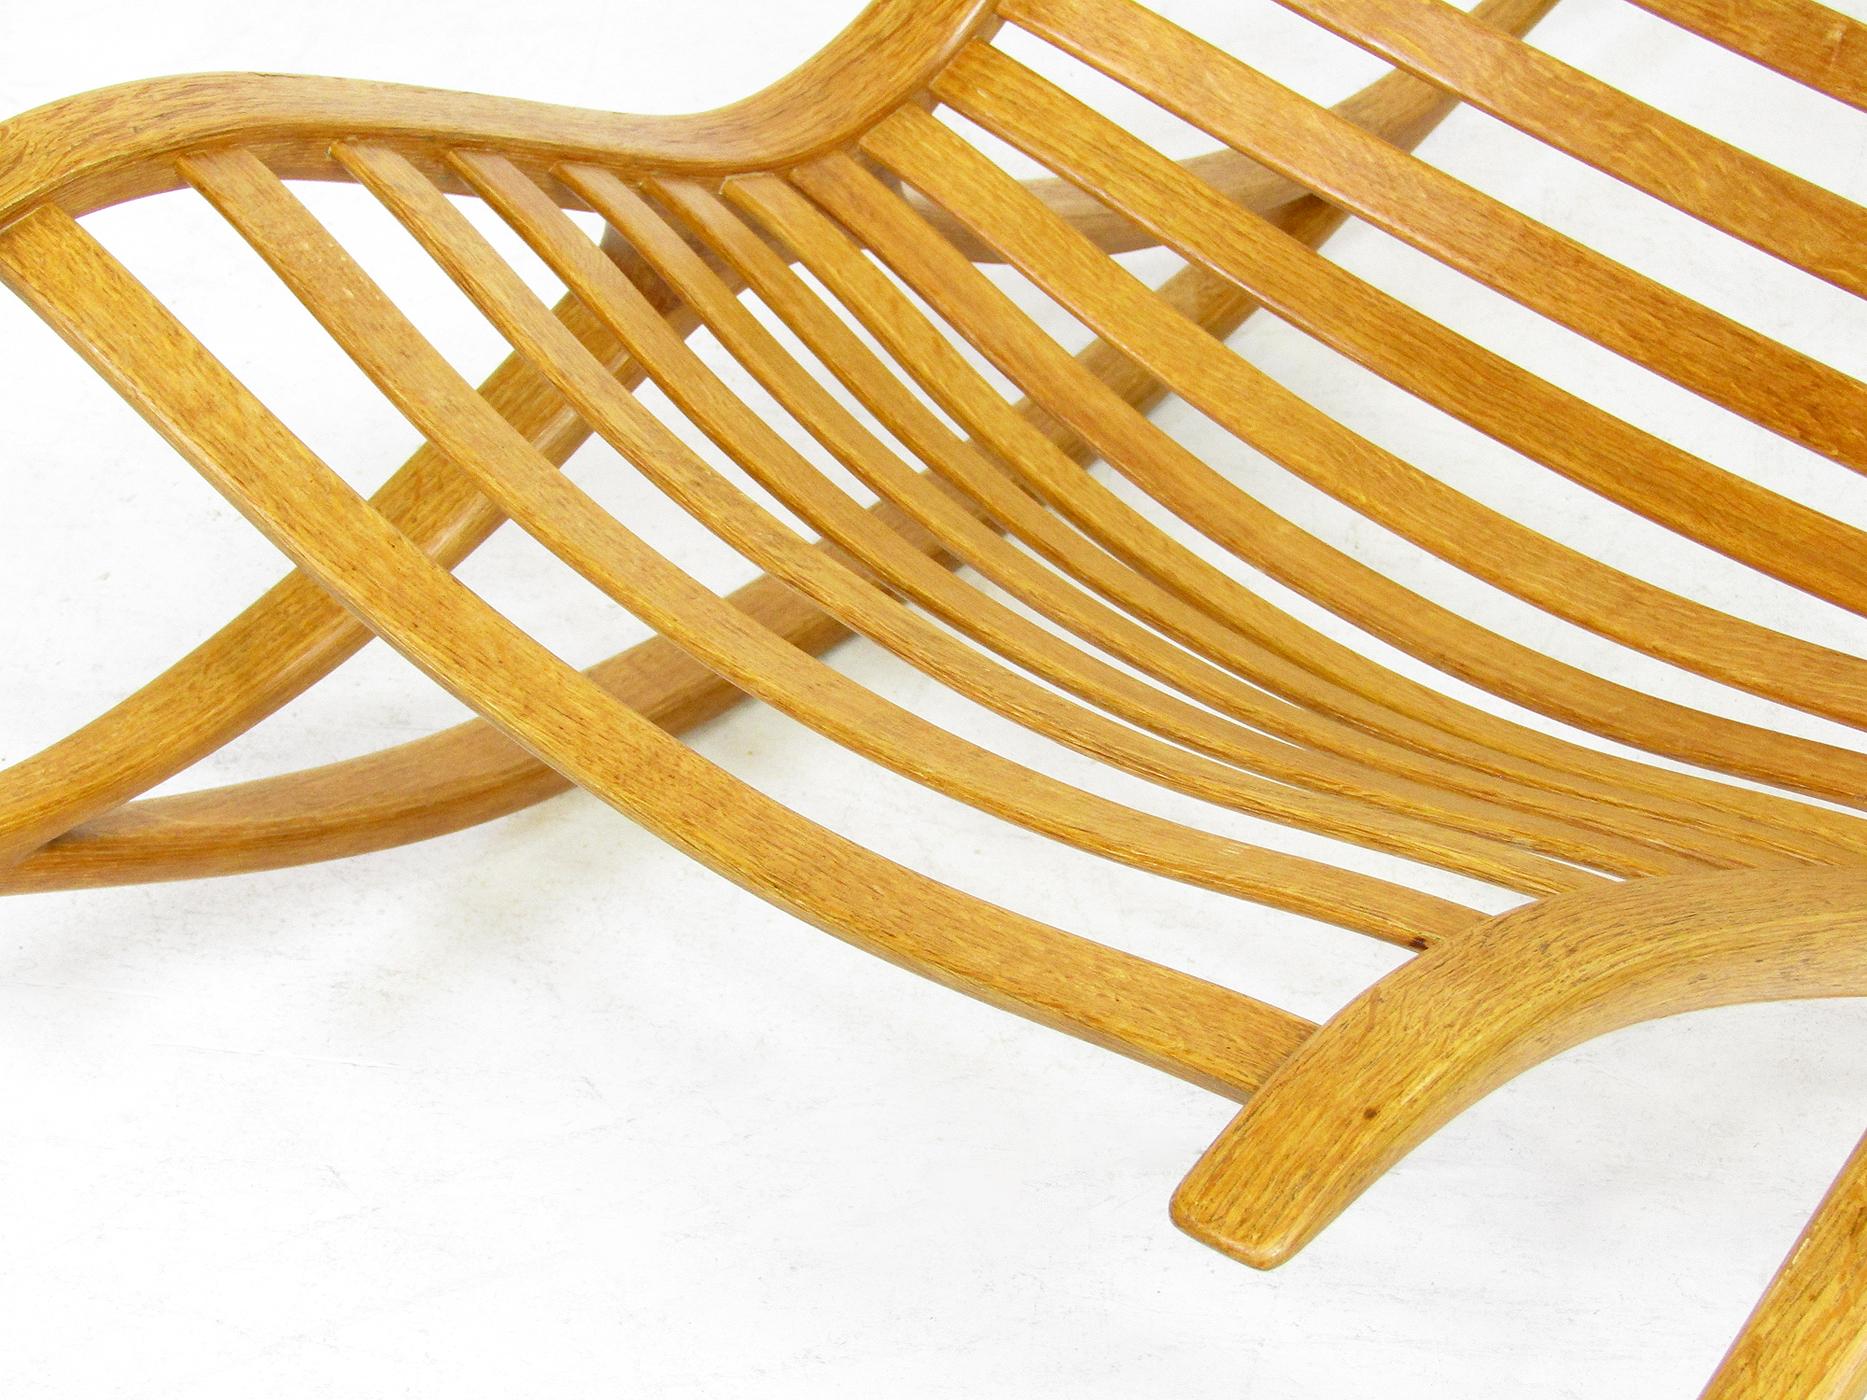 Sculptural 1960s Wishbone Rocking Chair In Oak By Robin Williams For Sale 1